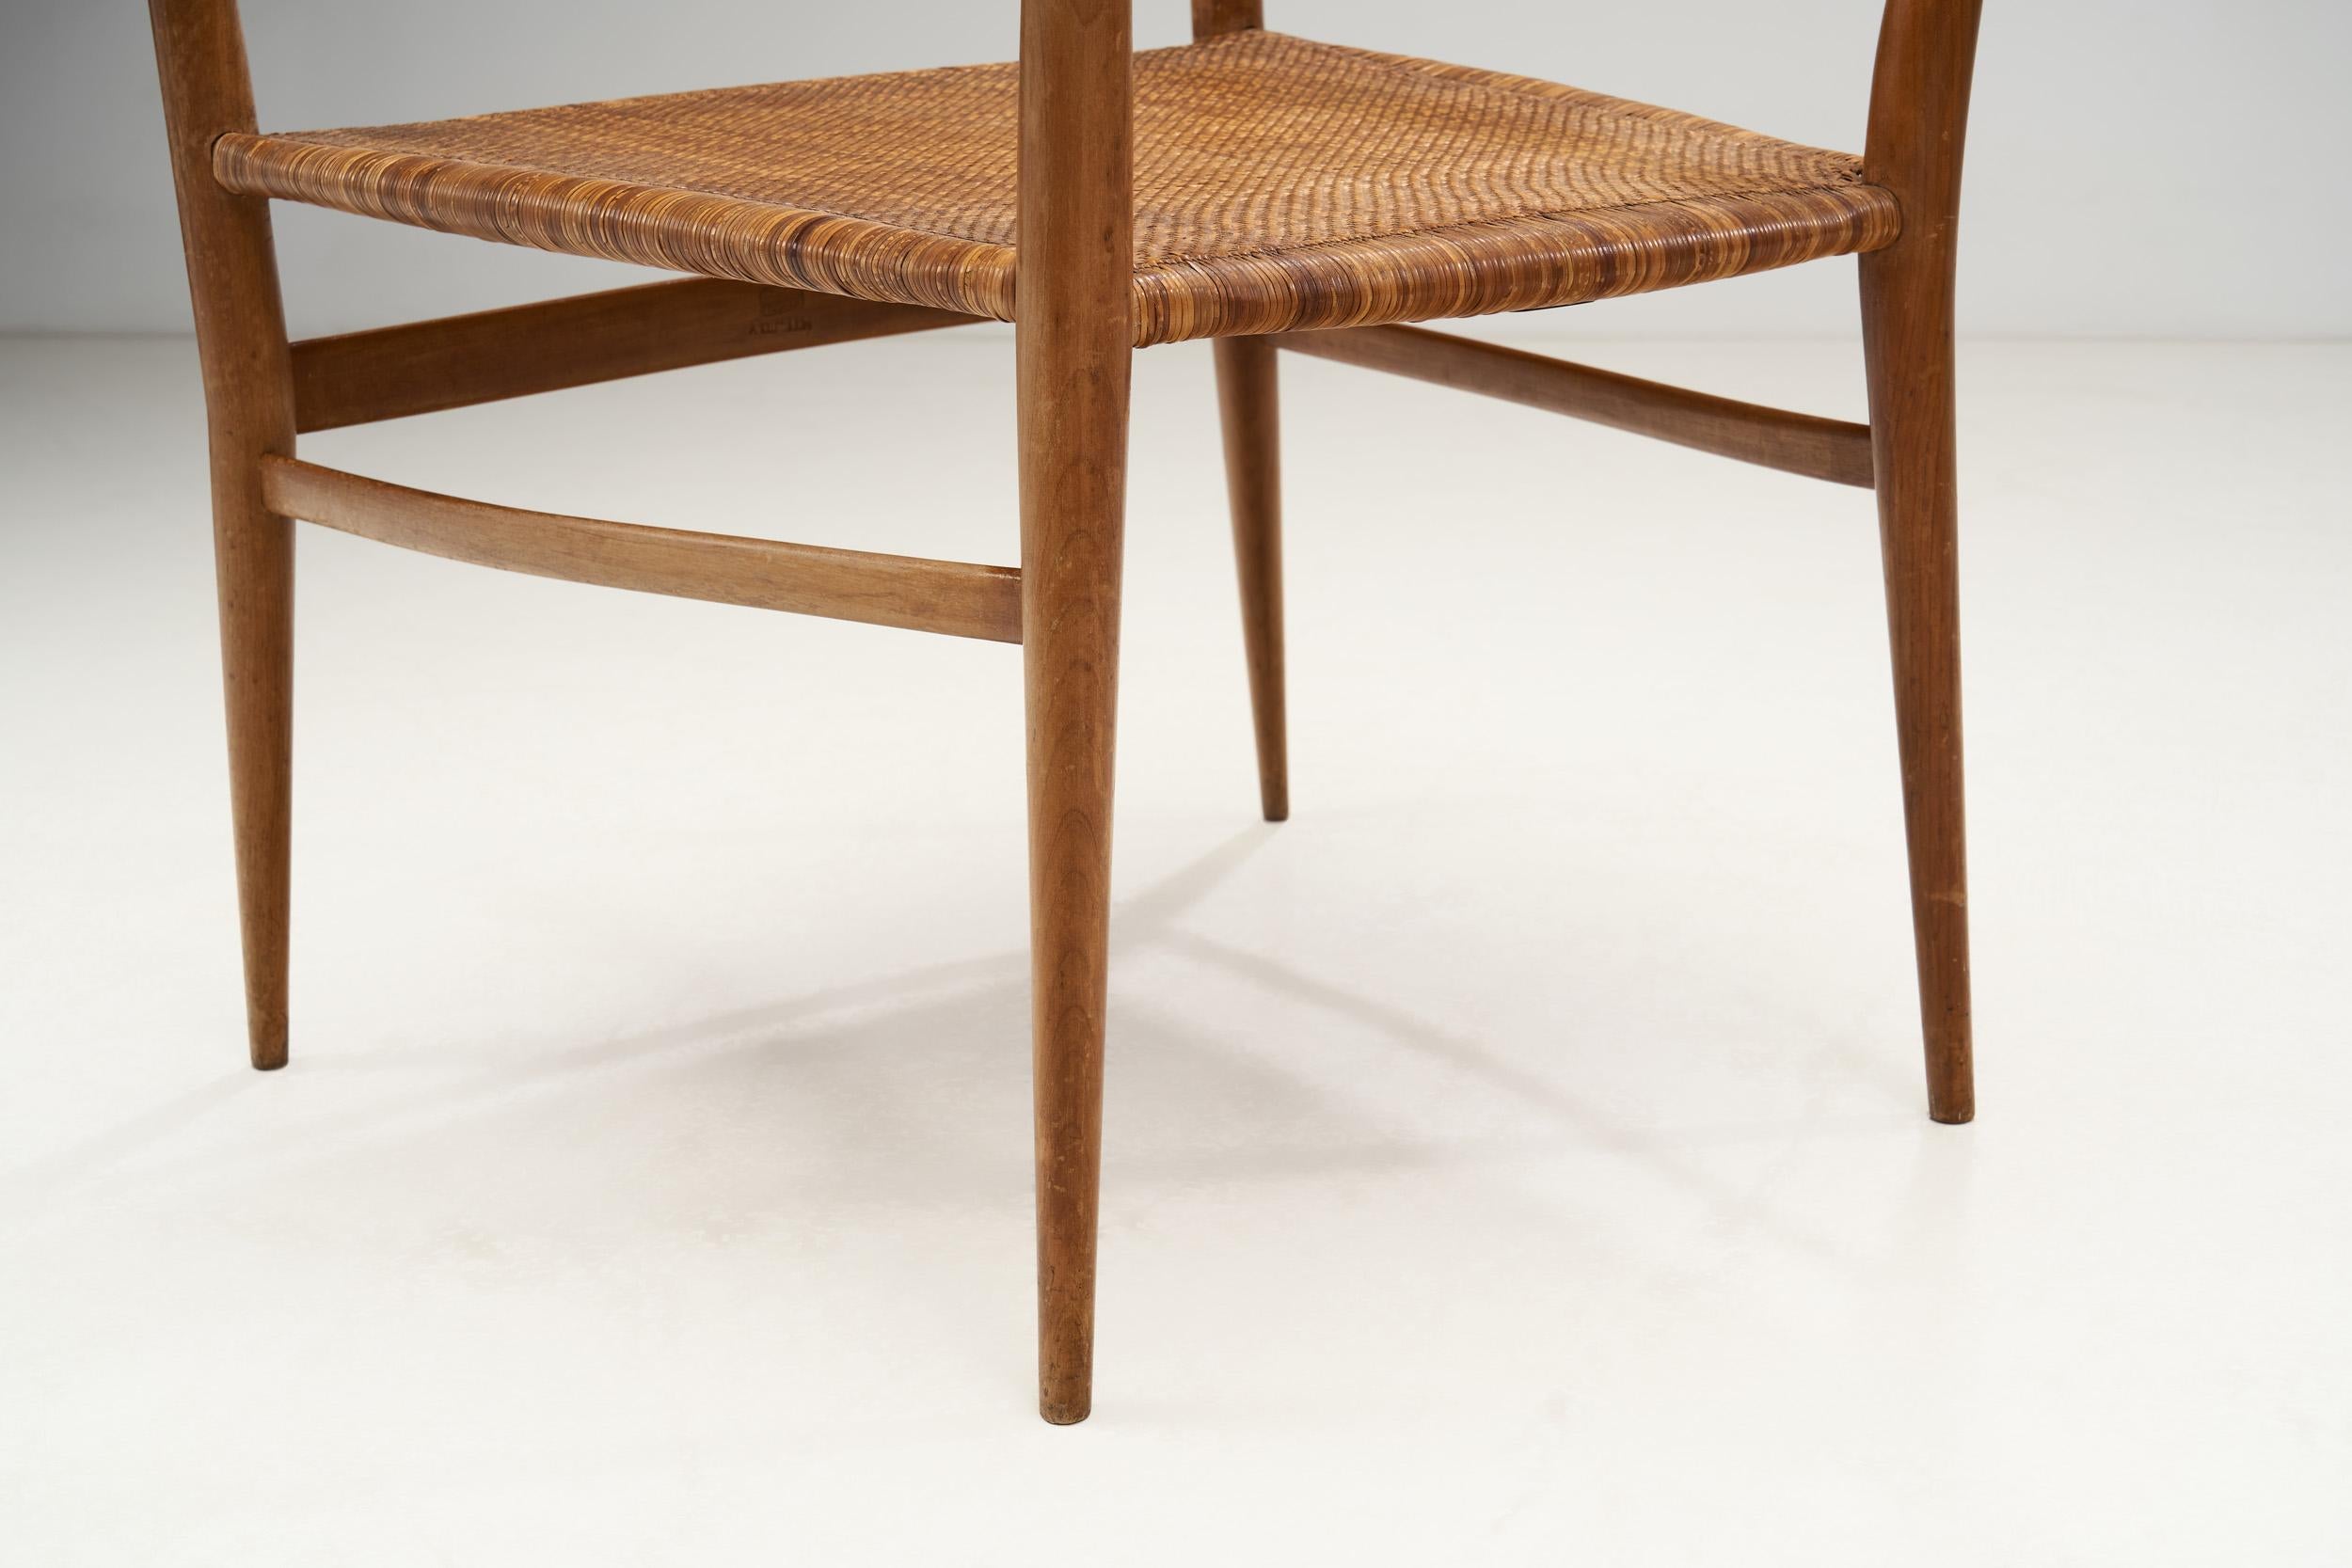 Emanuele Rambaldi Fruitwood Armchair with Woven Cane Seat, Italy 1950s 6